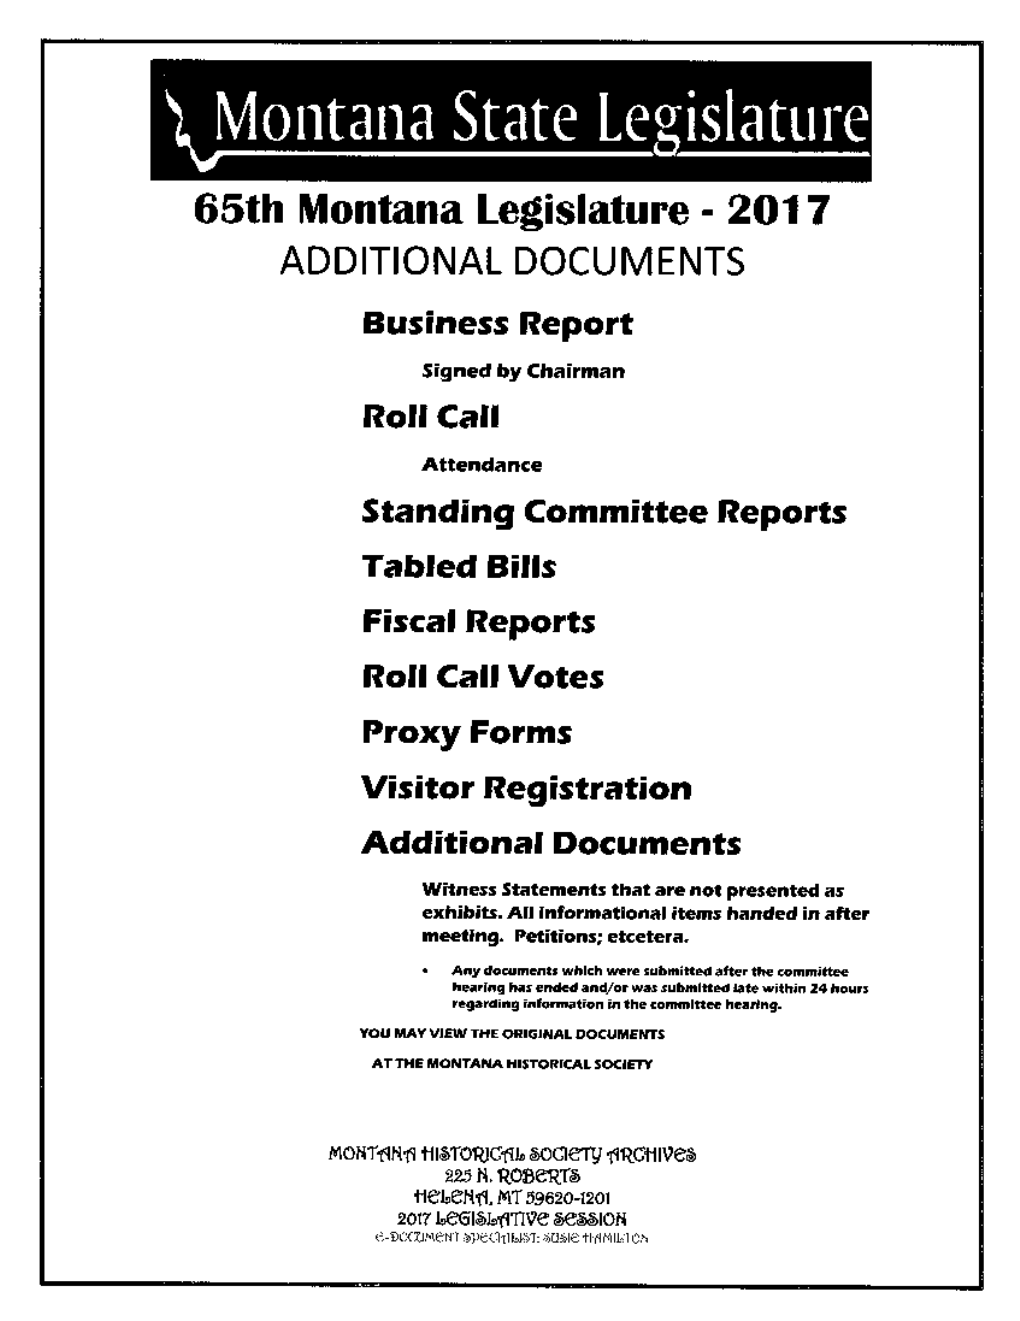 65Th Montana Legislature - 2{J17 ADDITIONAL DOCUMENTS Business Report Signe.T by Chairnan Roll Call